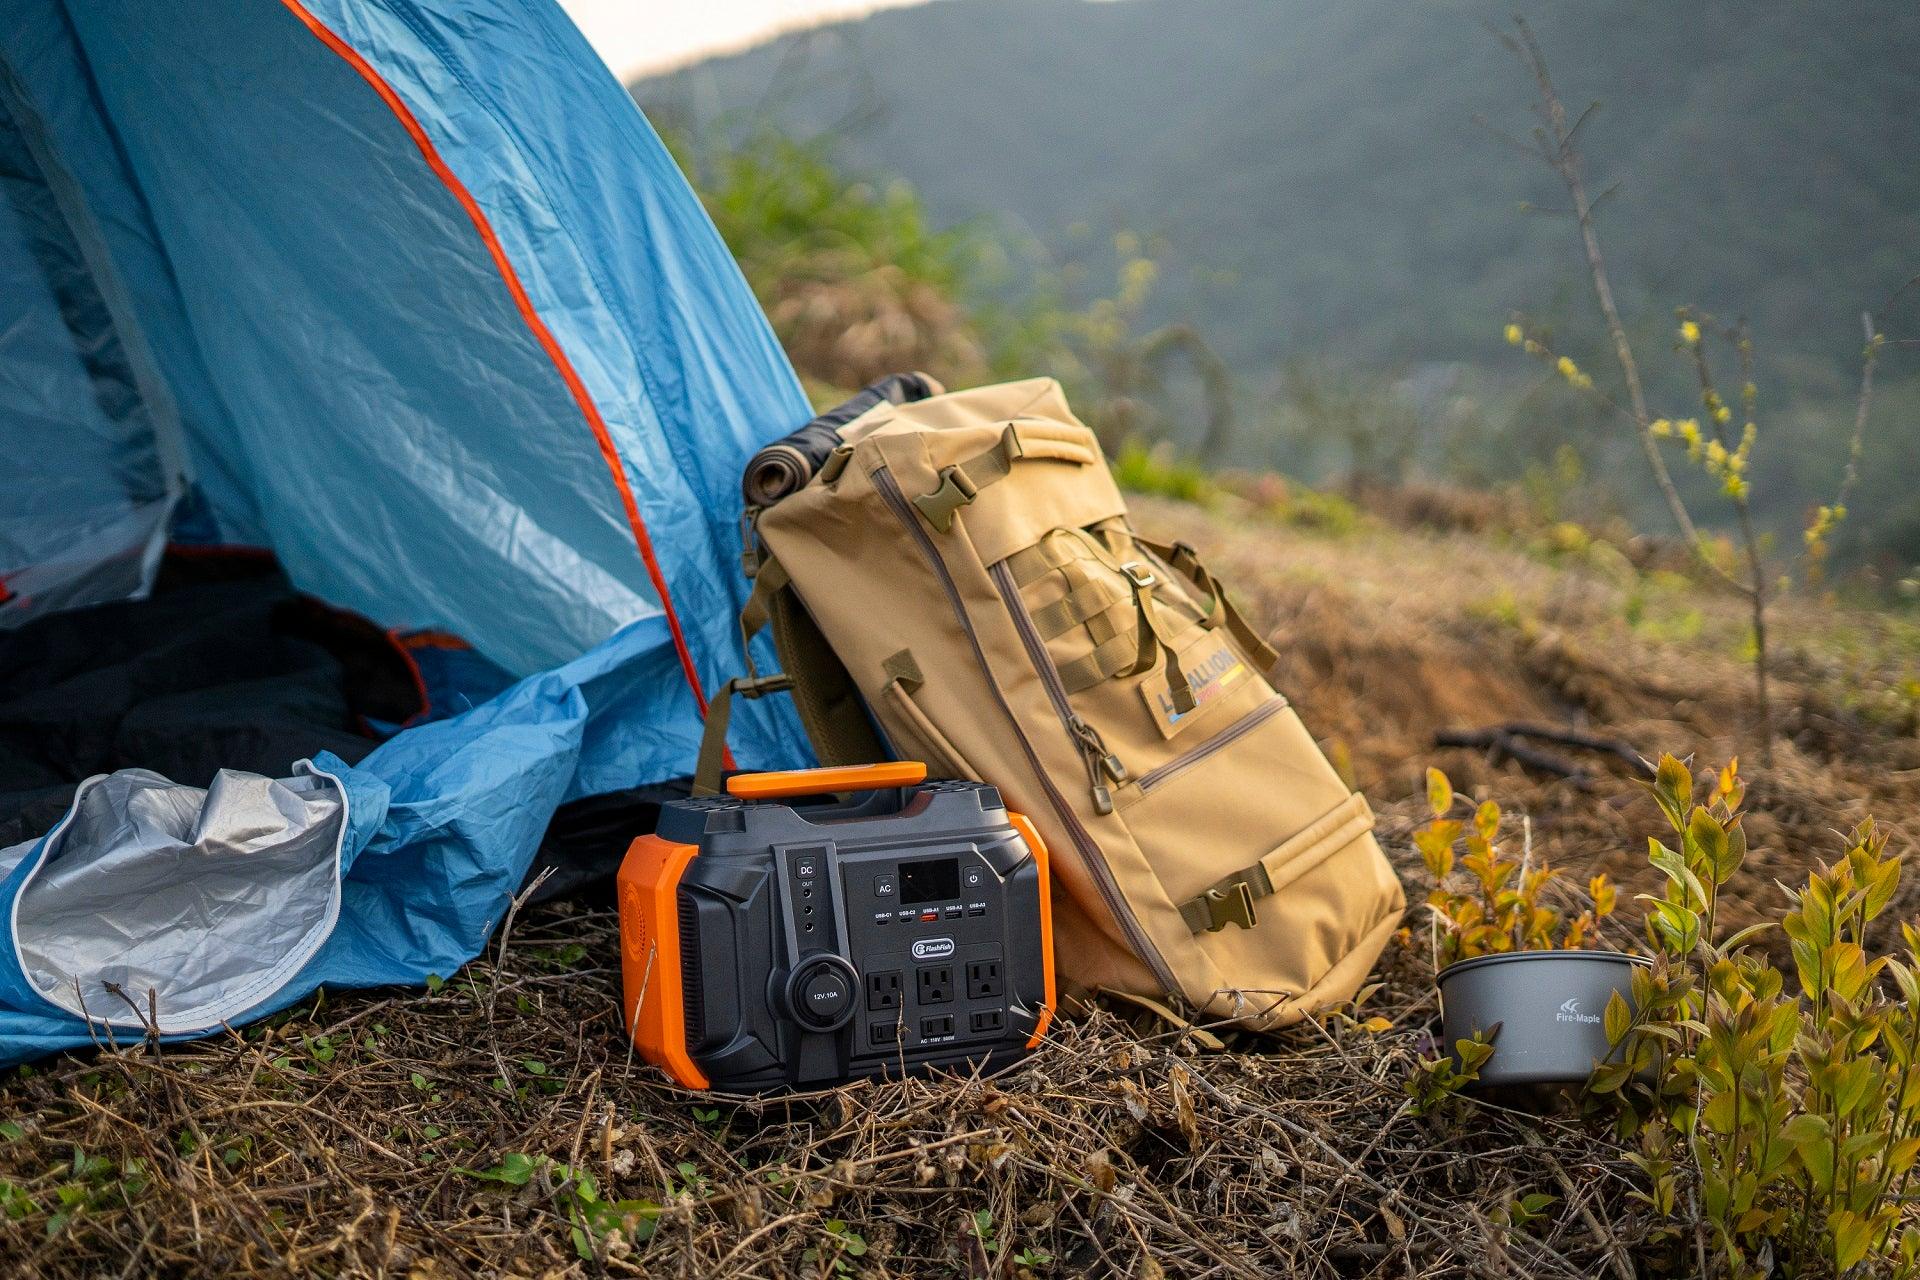 Outdoor mobile energy storage equipment: open a new outdoor experience